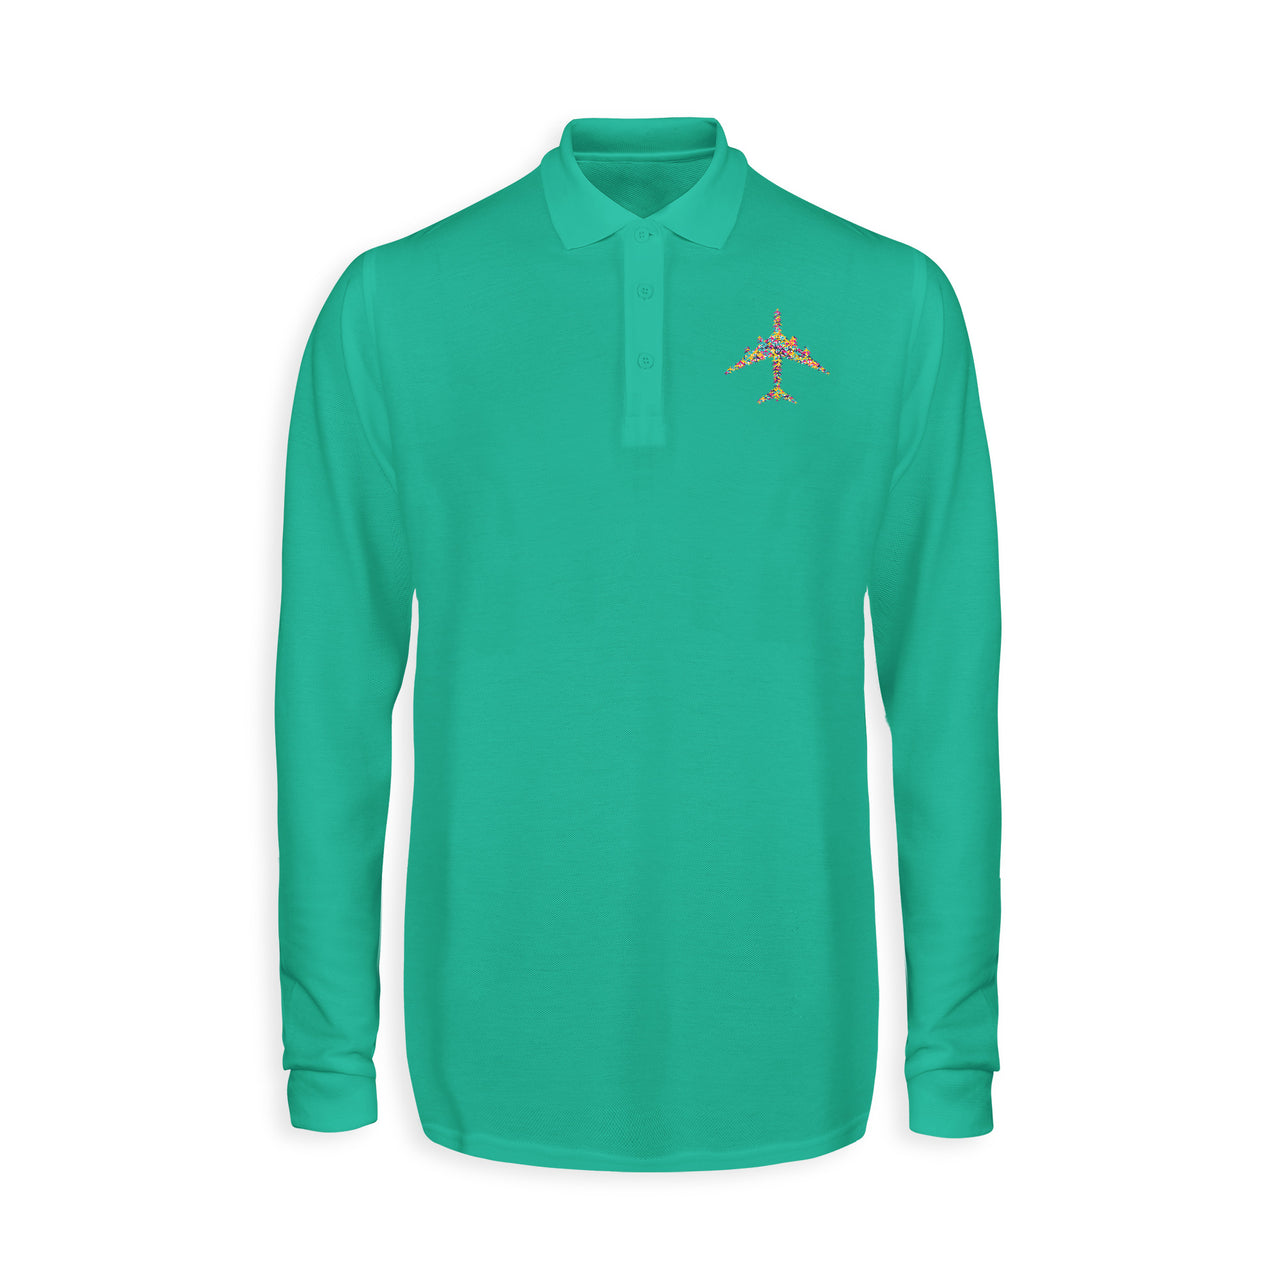 Colourful Airplane Designed Long Sleeve Polo T-Shirts